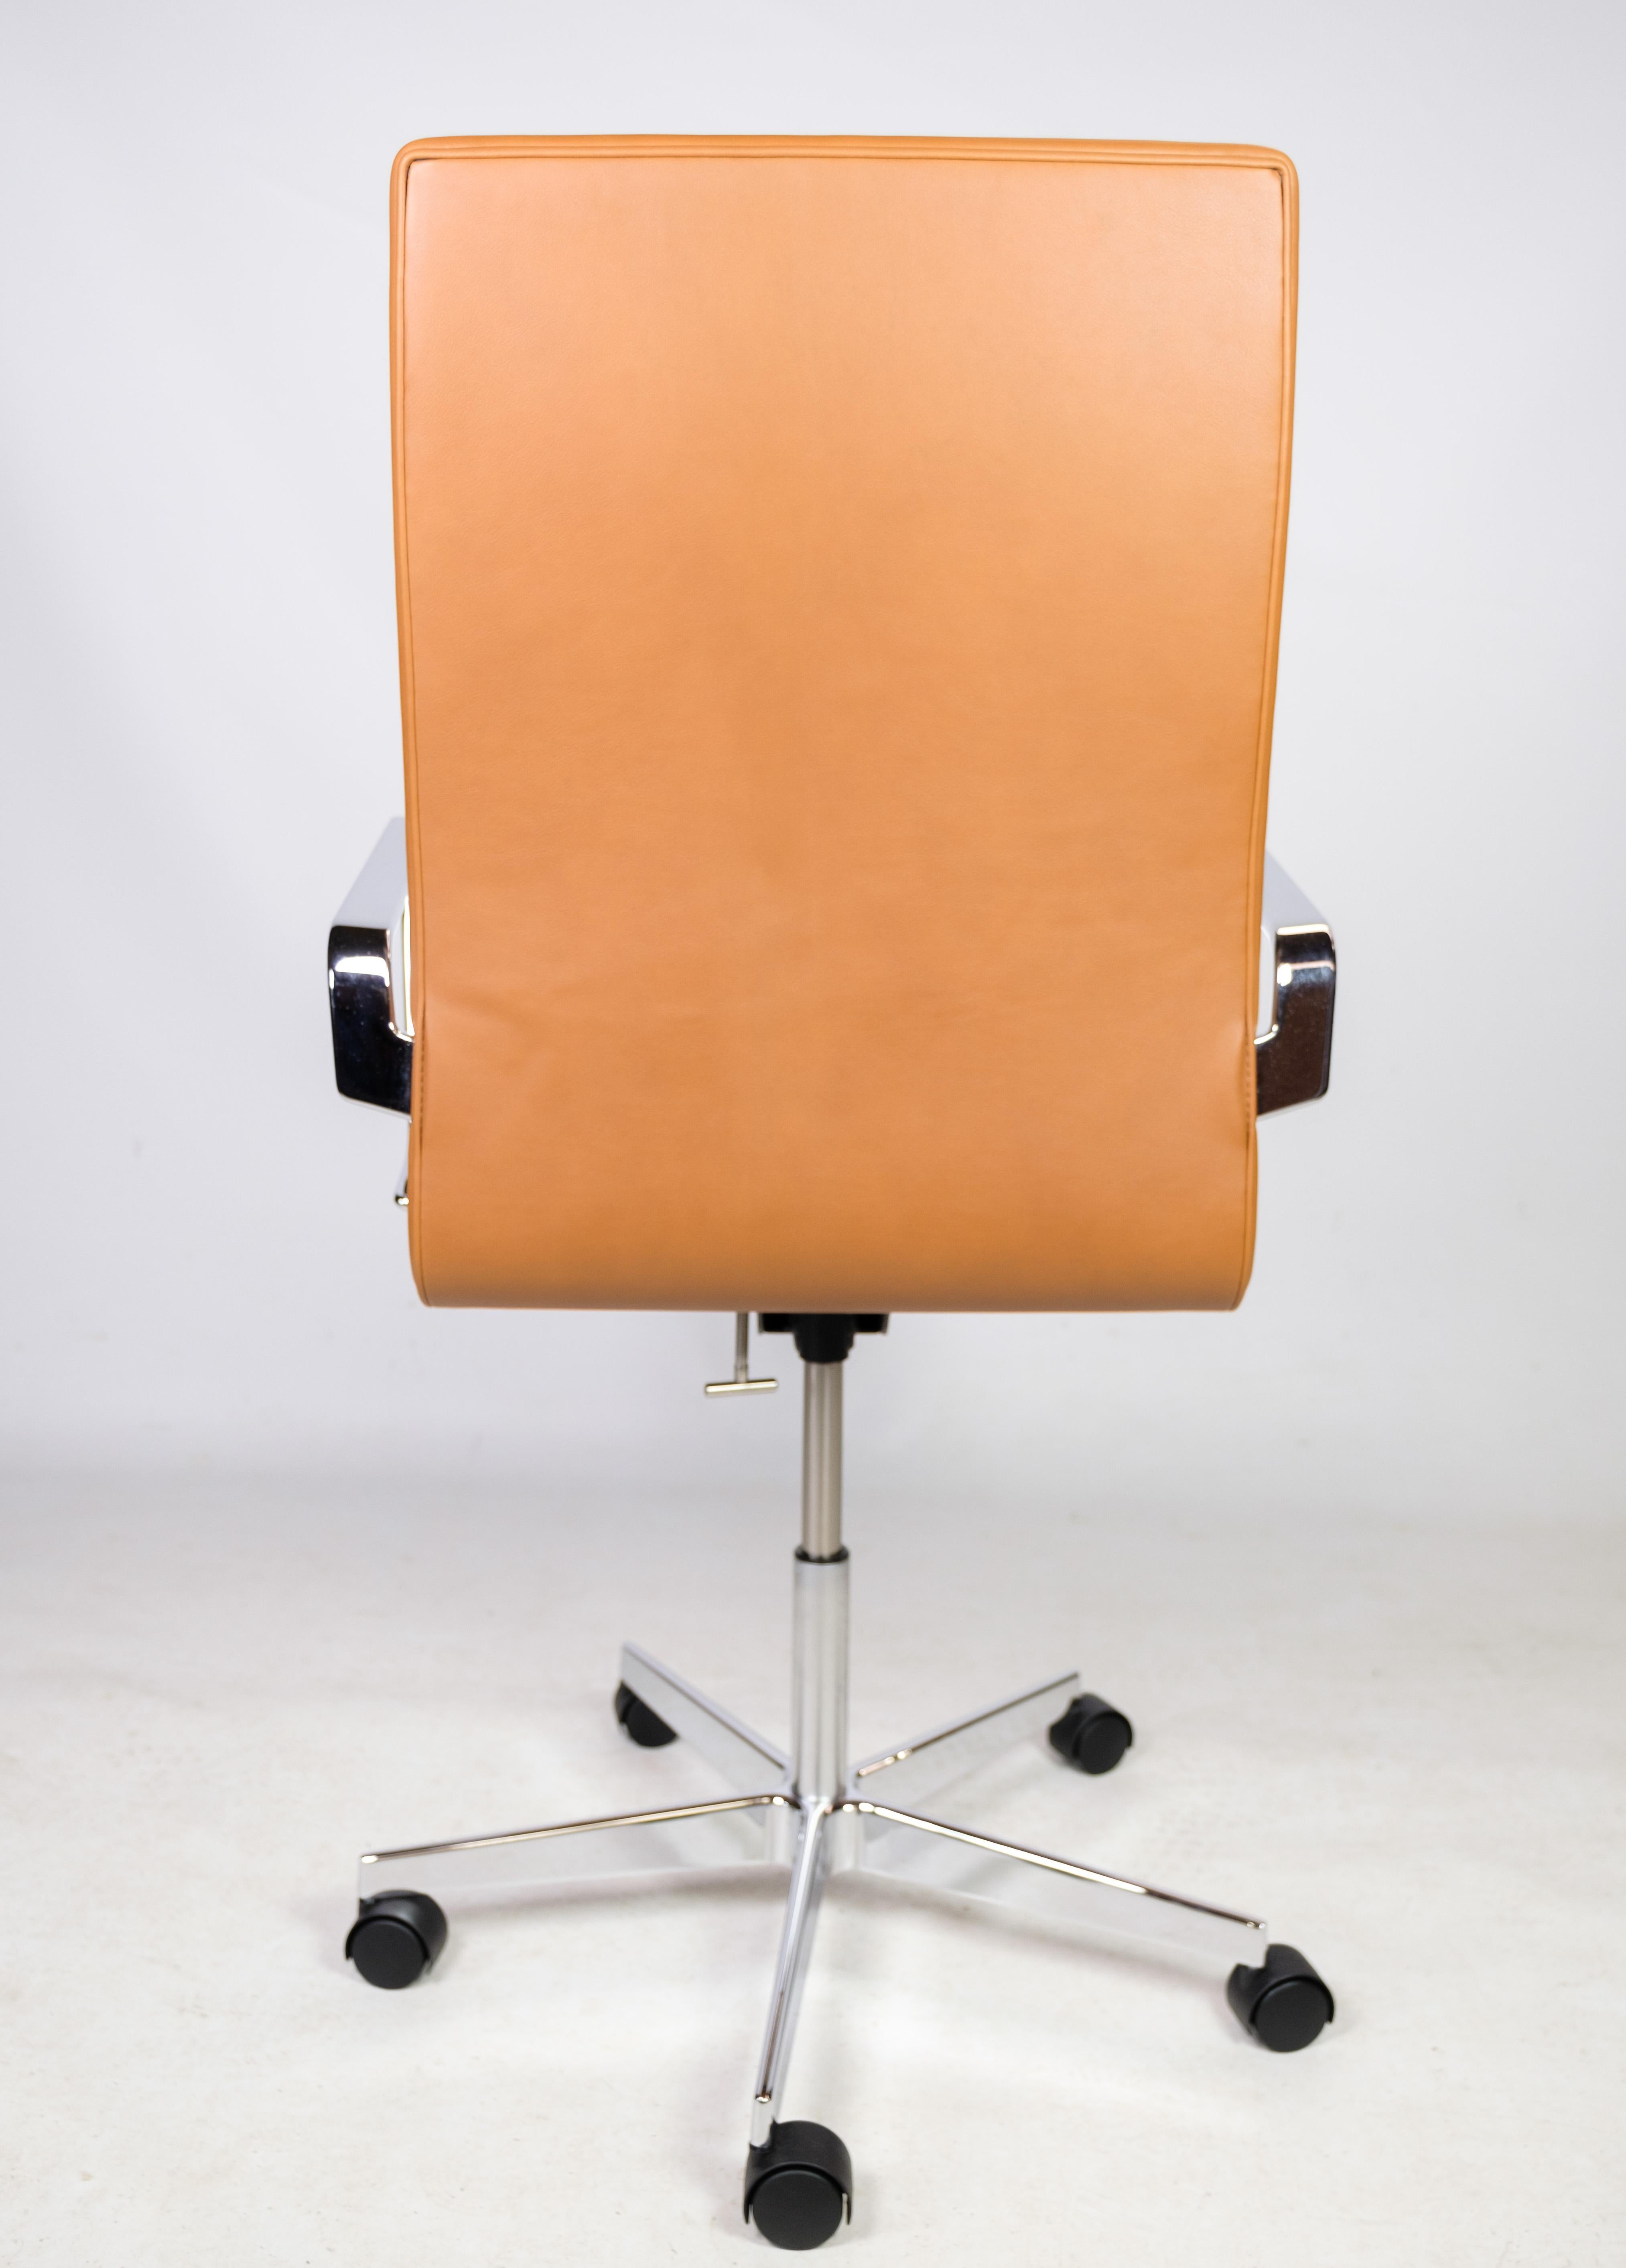 Oxford Classic office chair, model 3293C, with original cognac leather upholstery, designed by Arne Jacobsen in 1963 and manufactured by Fritz Hansen. The chair is in nice used condition.
Measures: H - 100-113, W - 60 cm, D - 60 cm and SH - 42-55